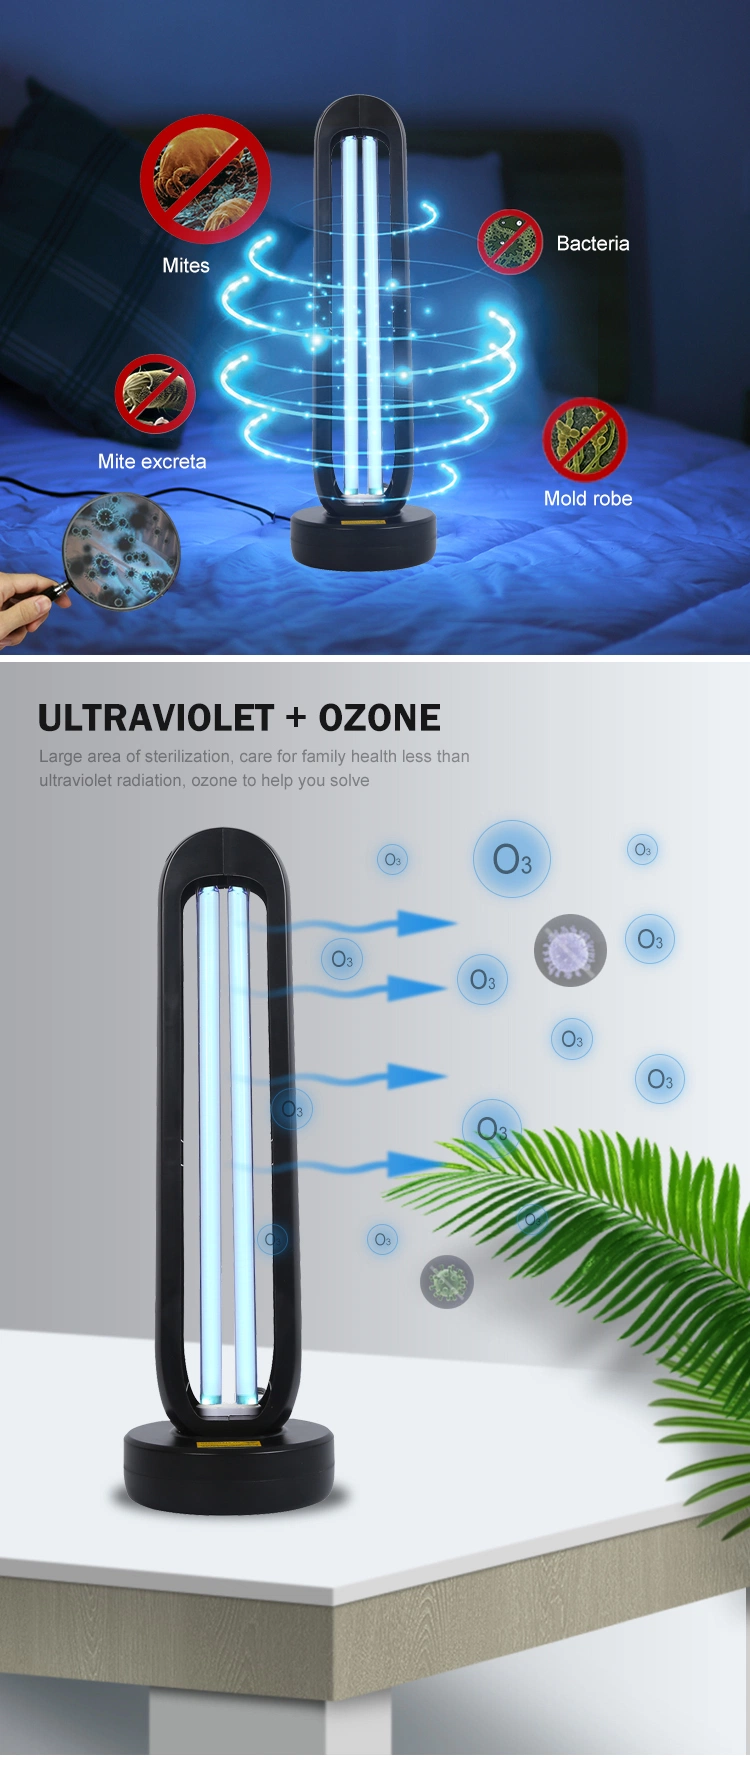 UVC Portable Disinfection Lamp with Ozone Ultraviolet Germicidal UV Lamp